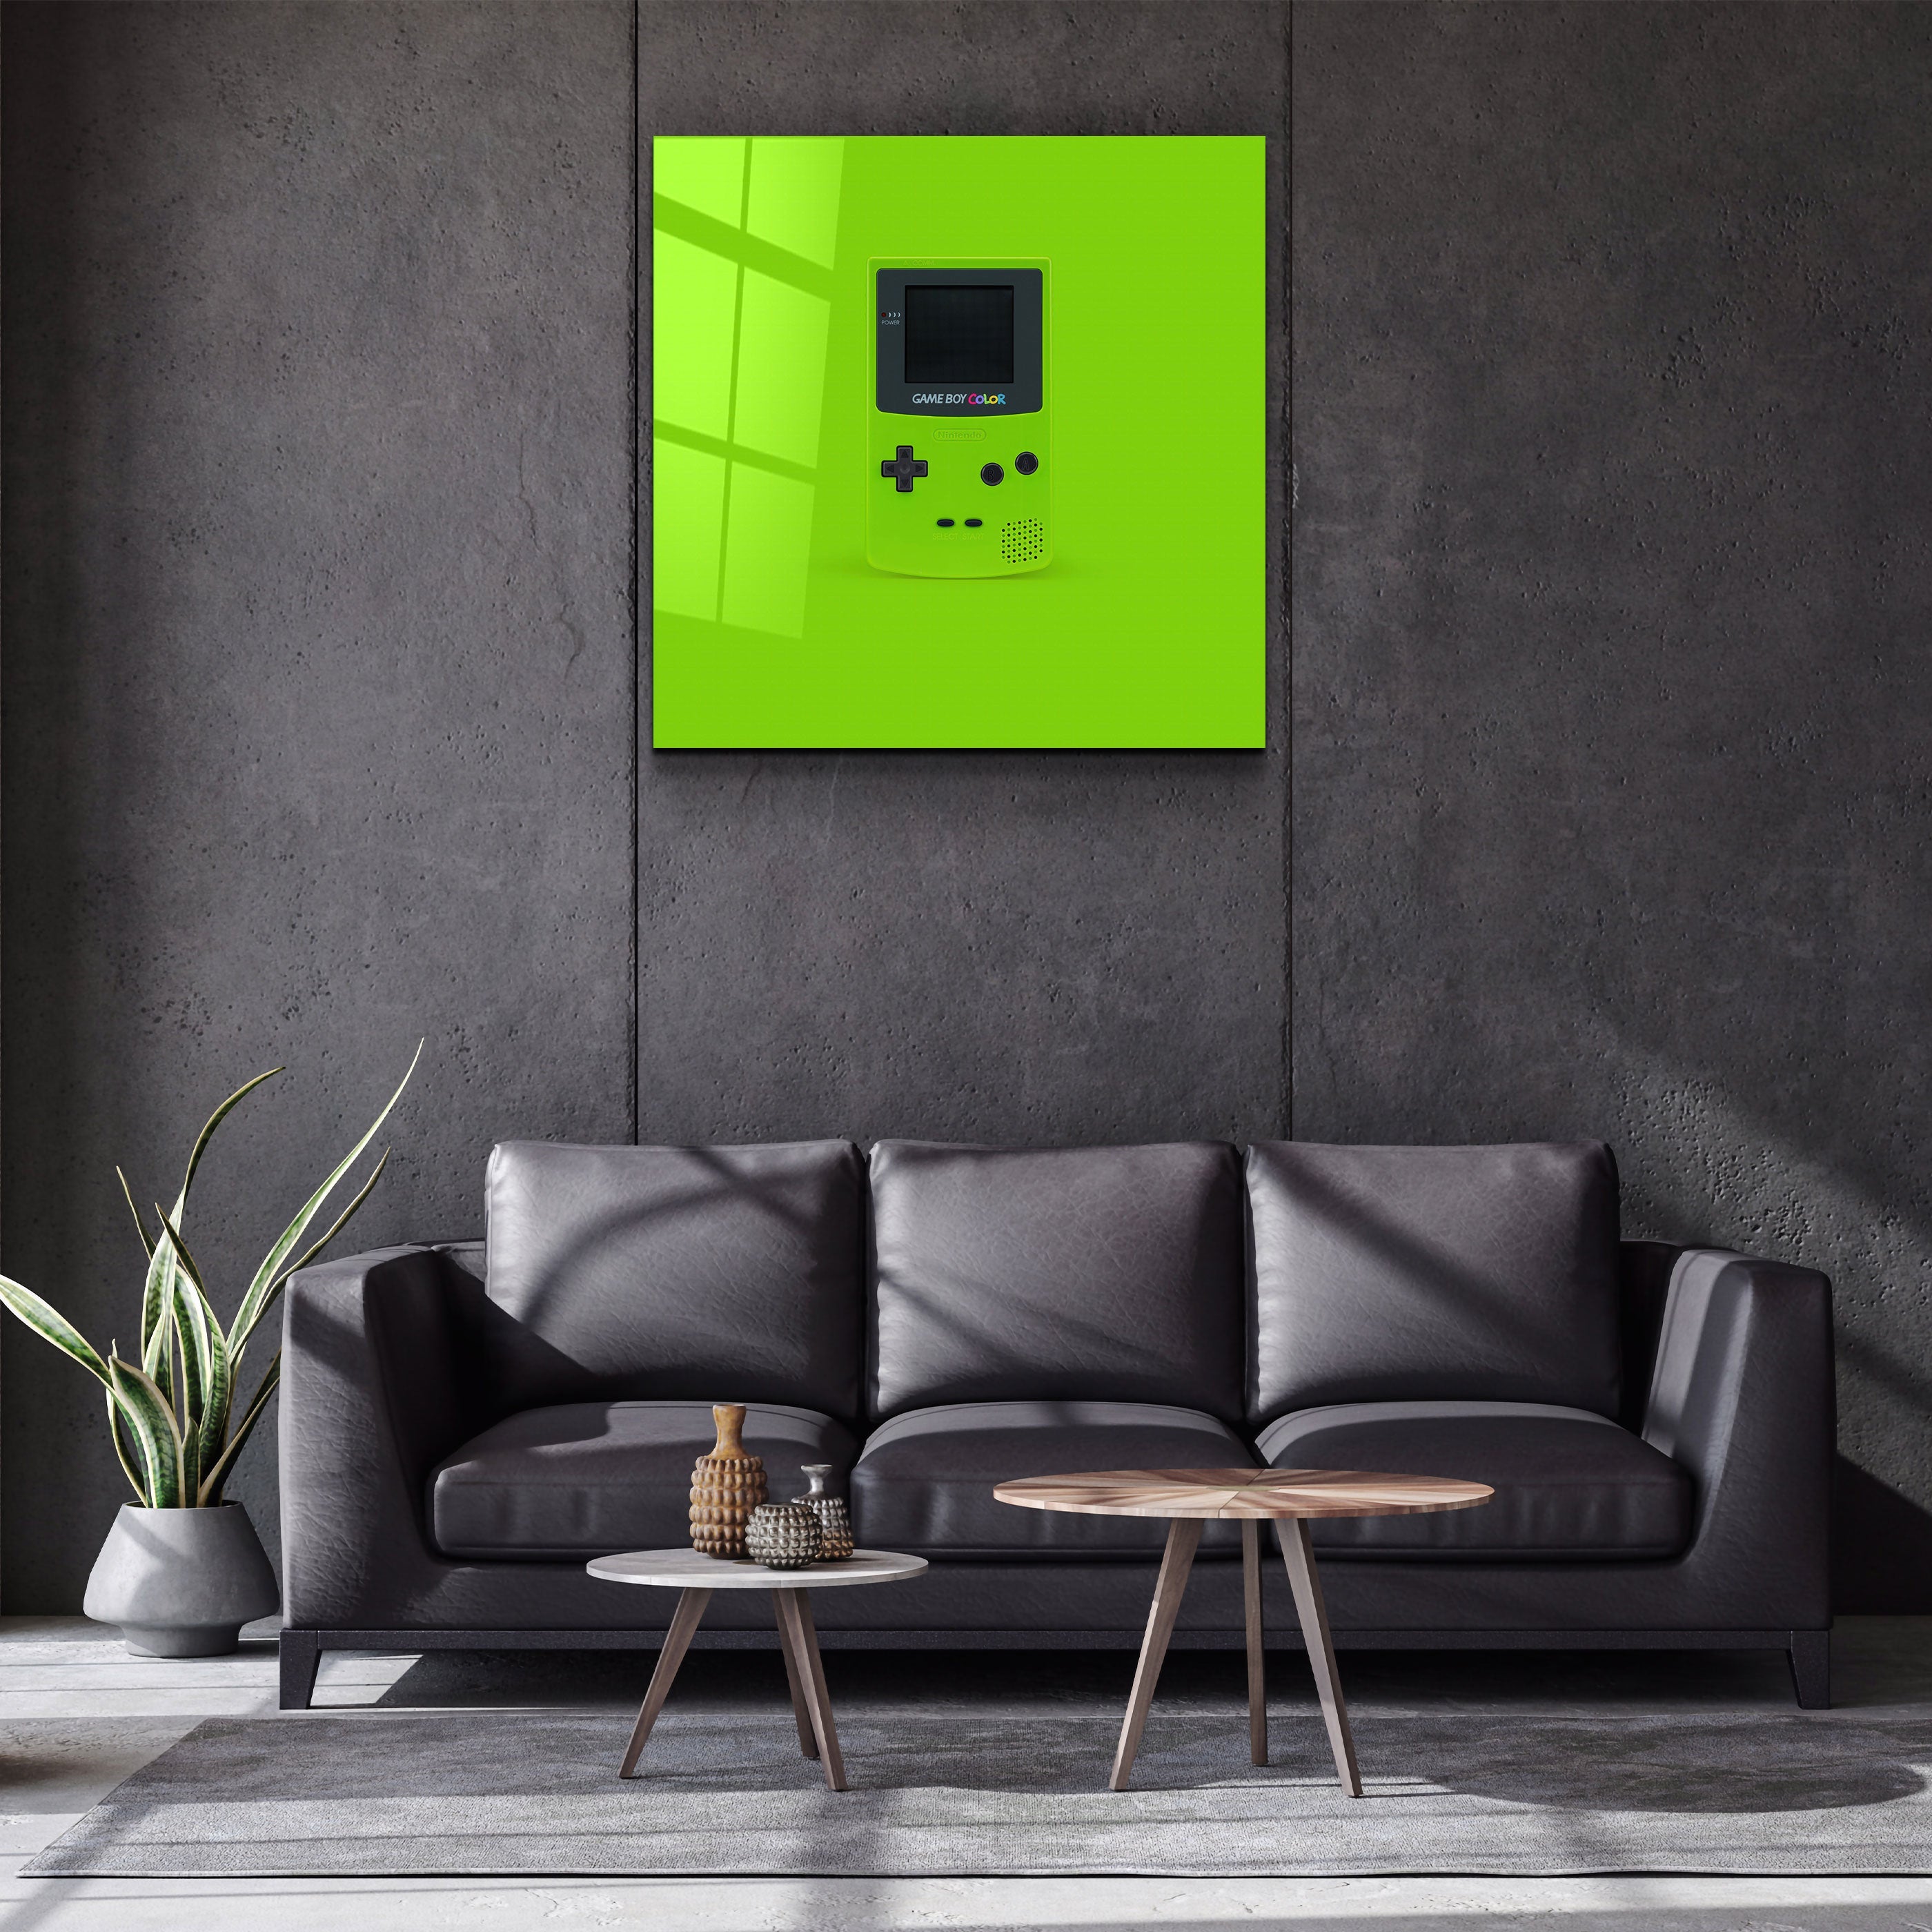 ."GameBoy". Designer's Collection Glass Wall Art